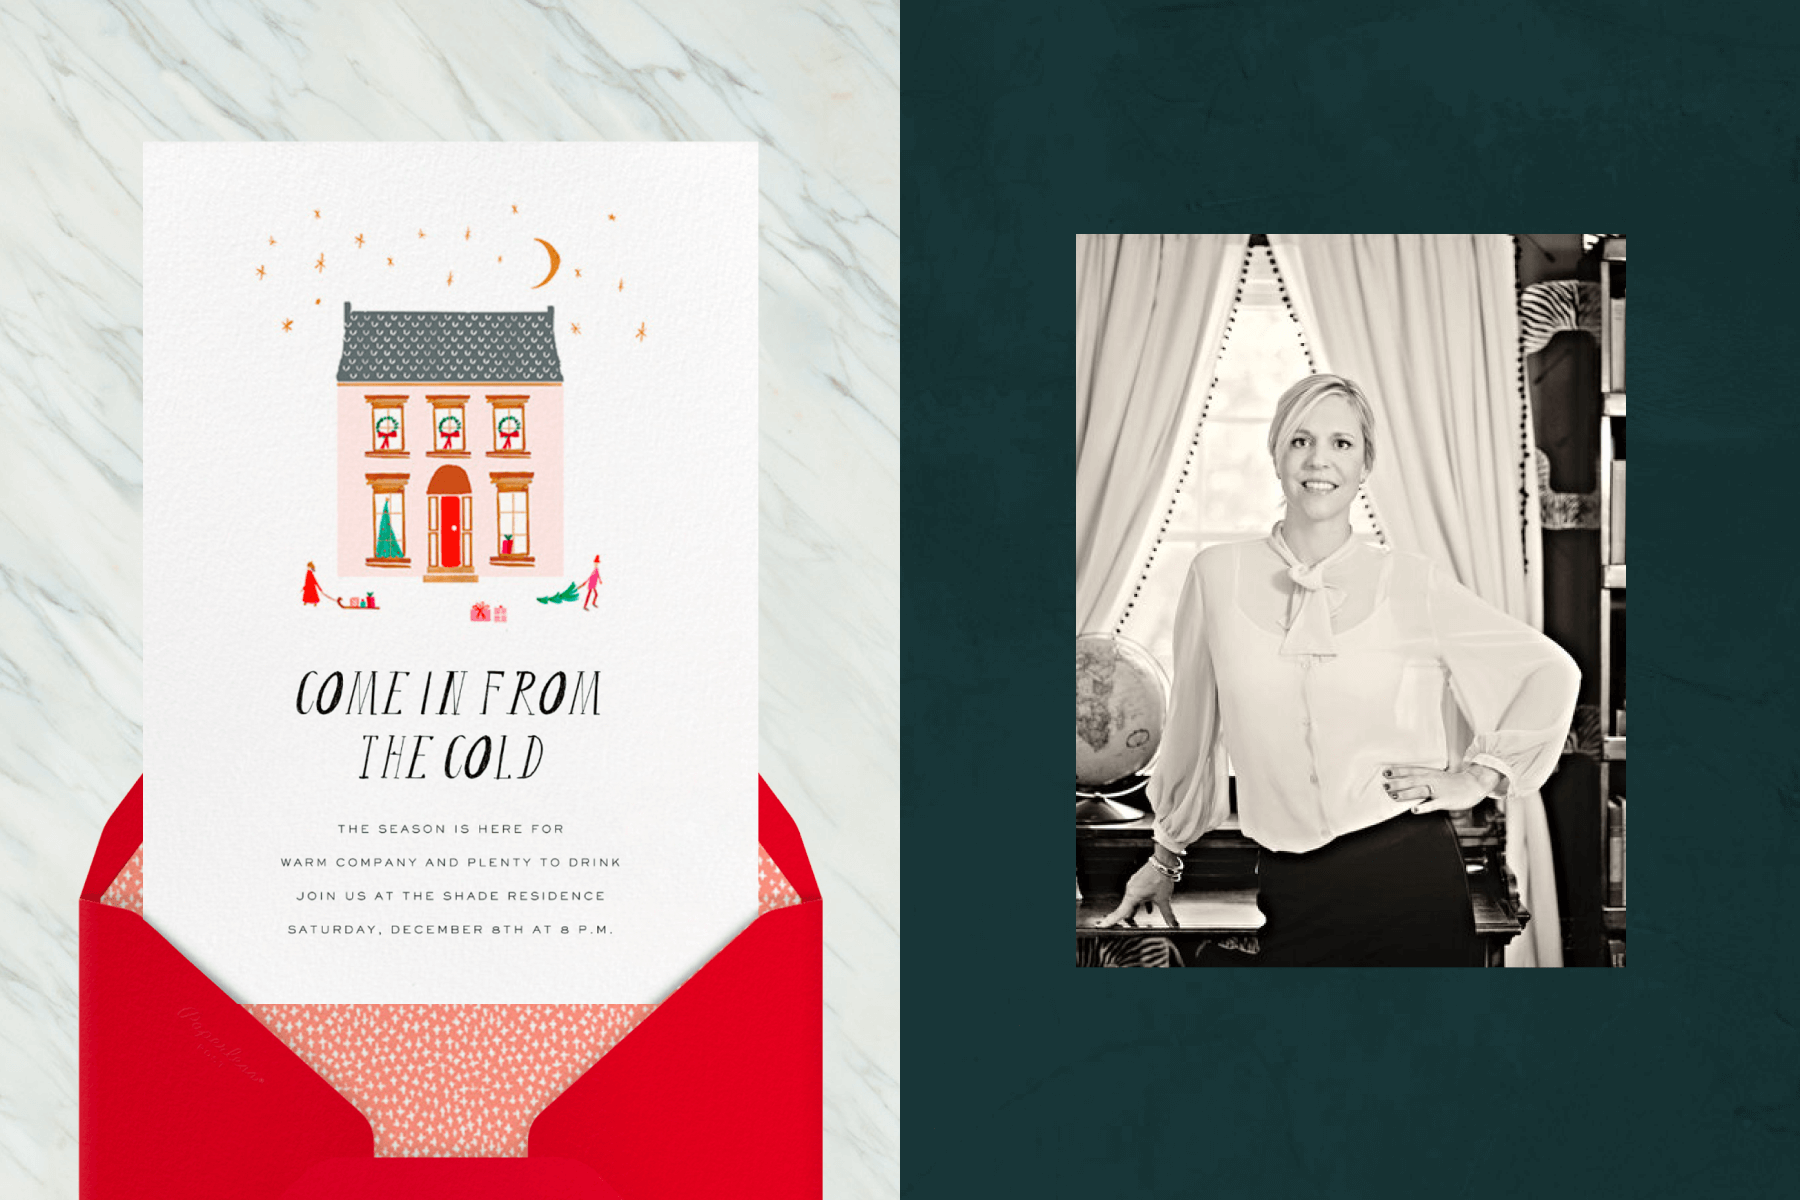 left: A white holiday cocktail party invitation with an illustration of a pink house with wreaths and a Christmas tree in the windows and people going about wintertime activities in front. Right: A black and white photo of a woman (Rebecca Ruebensaal) posing in front of a window with white curtains